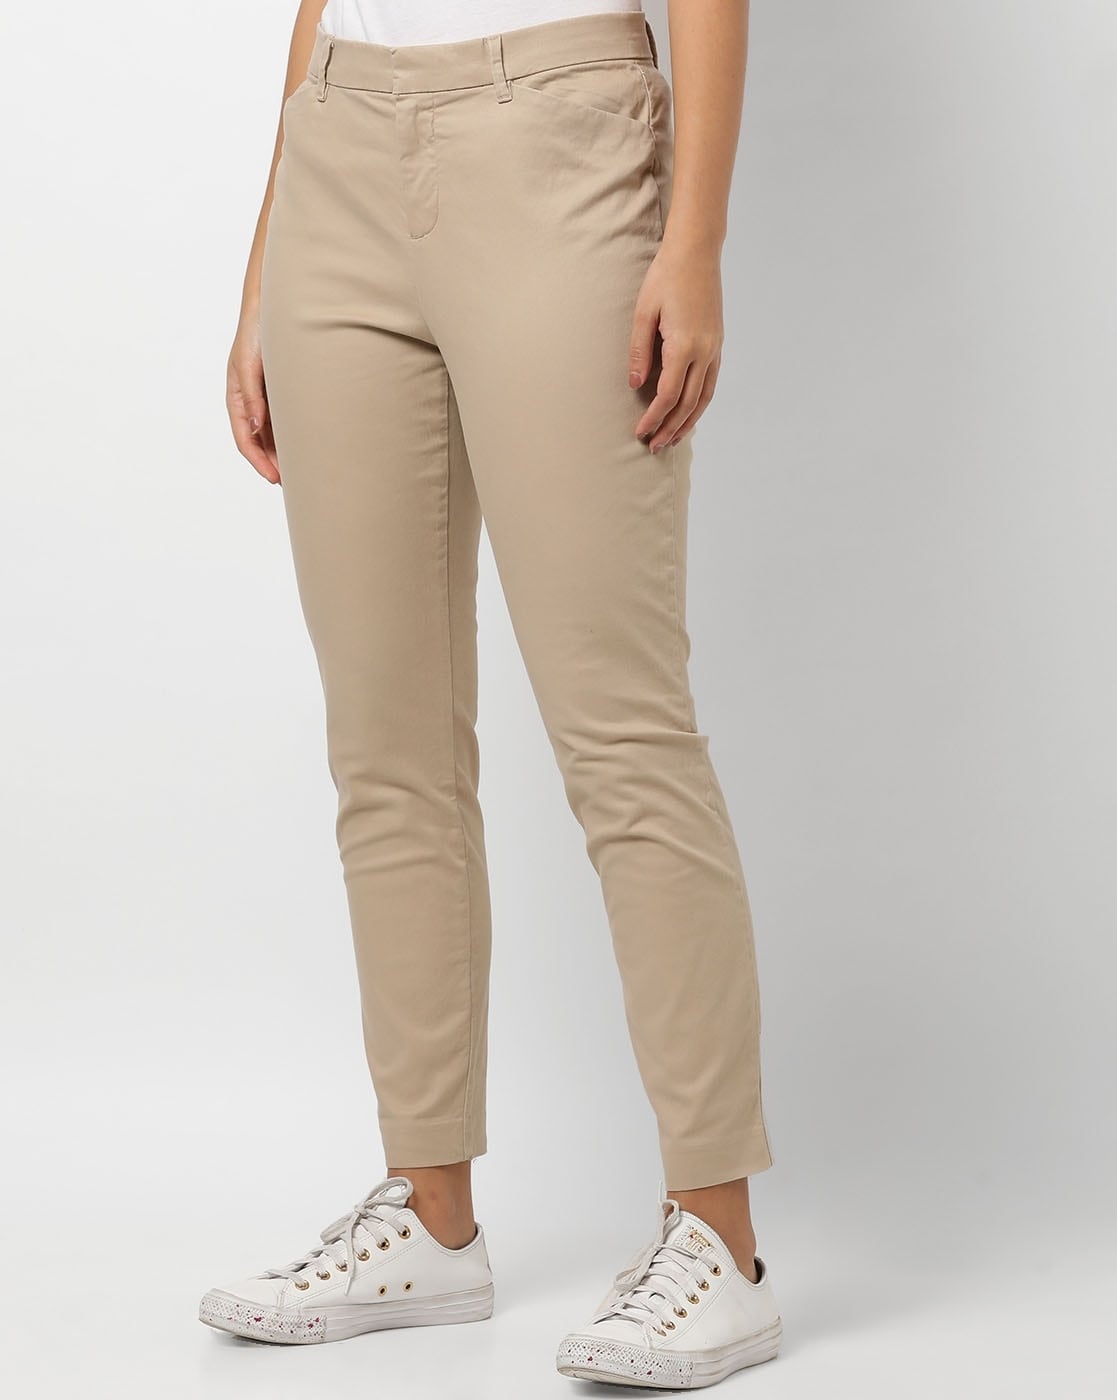 Buy FUSION BEATS Trousers for Women Mid Rise SkinnyFit Pants Ankle  Length Stylish Pants Ethnic Wear Casual Bottom Wear for Office Beige  at Amazonin